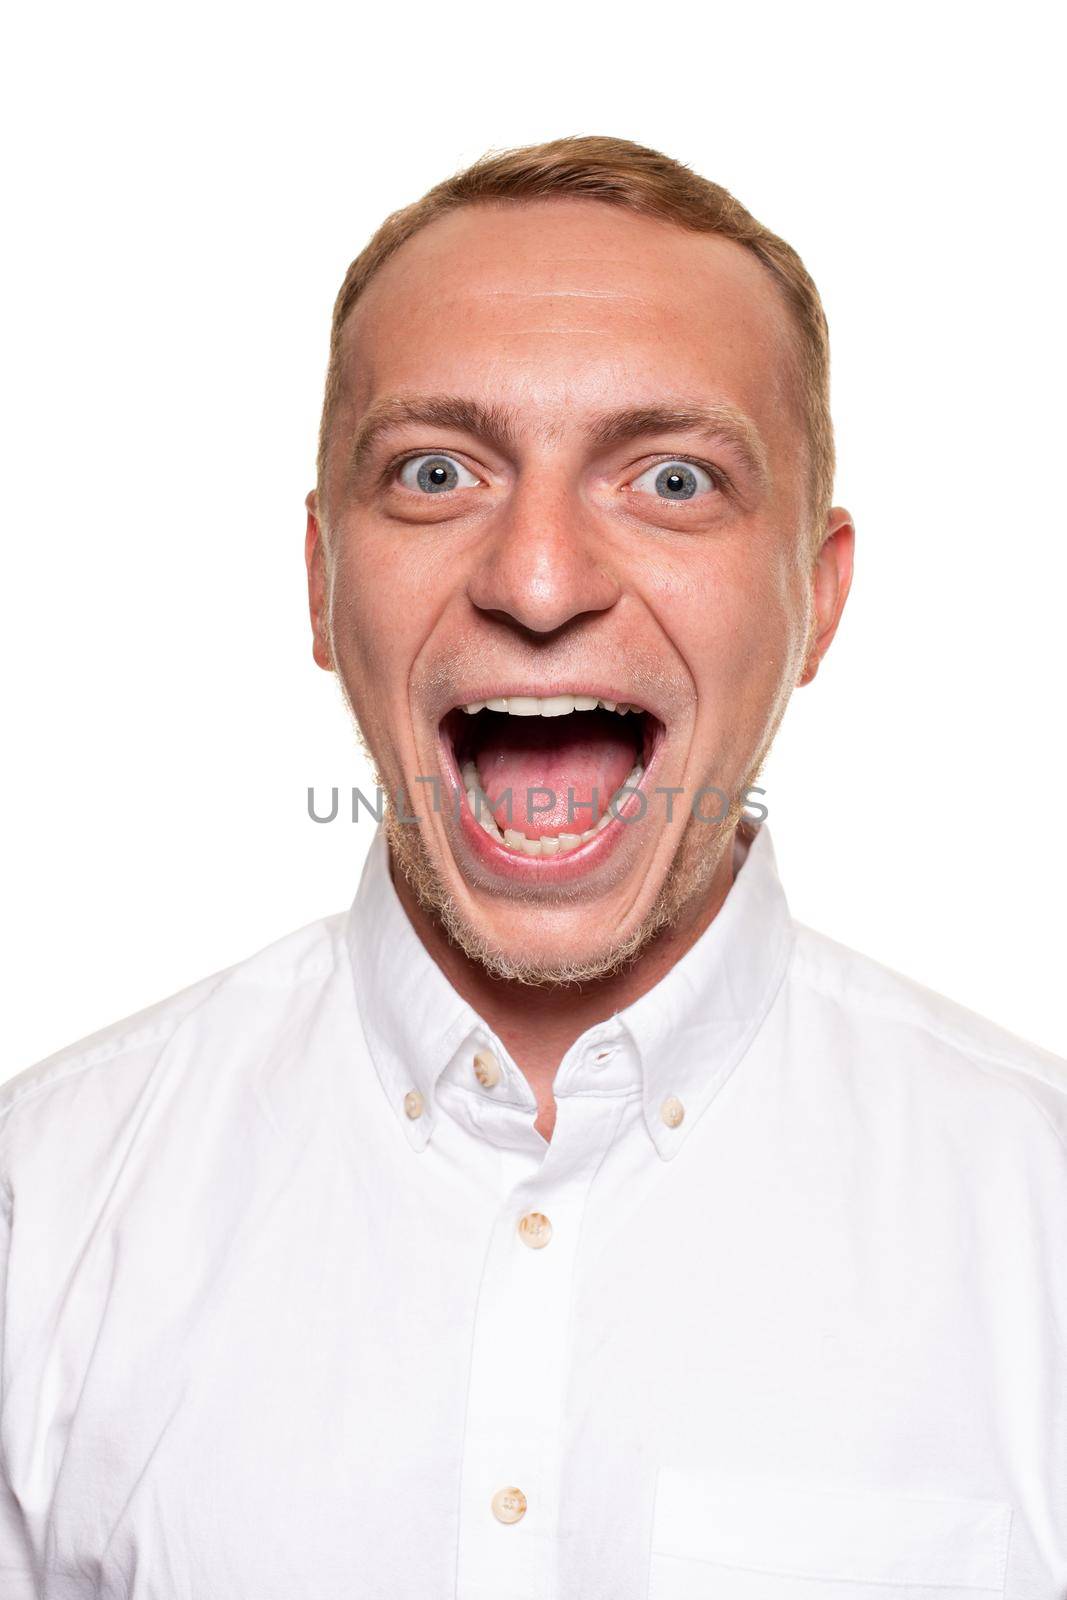 Handsome young blond man in a white shirt have opened his mouth, isolated on a white background